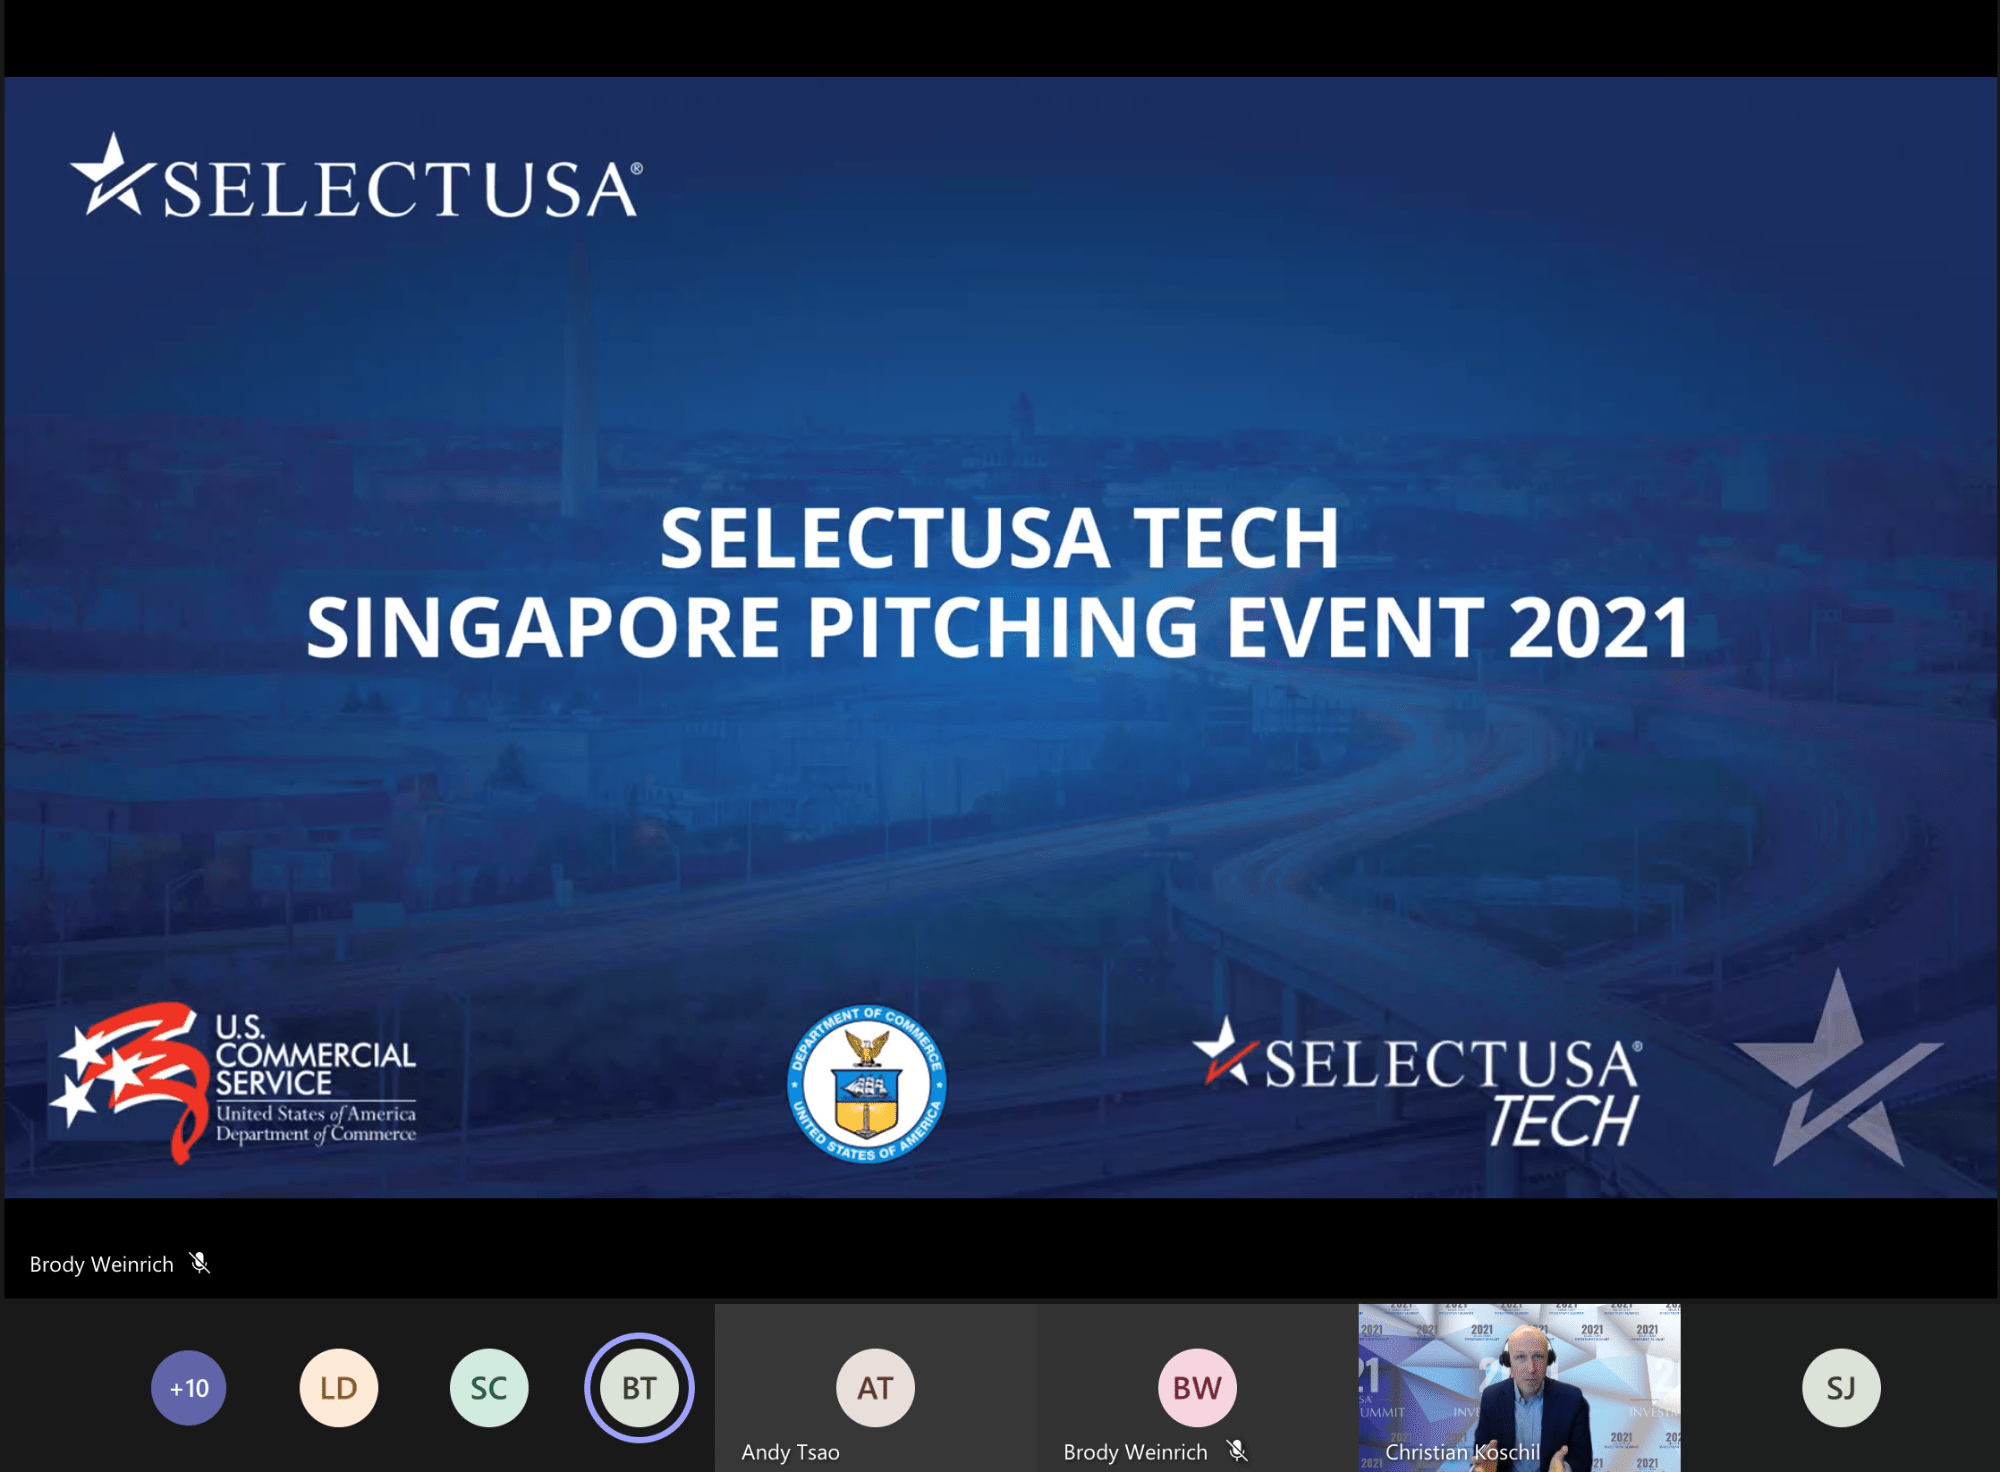 NTUitive startup TAU Express clinches 3rd place in selectech USA Singapore pitching event 2021